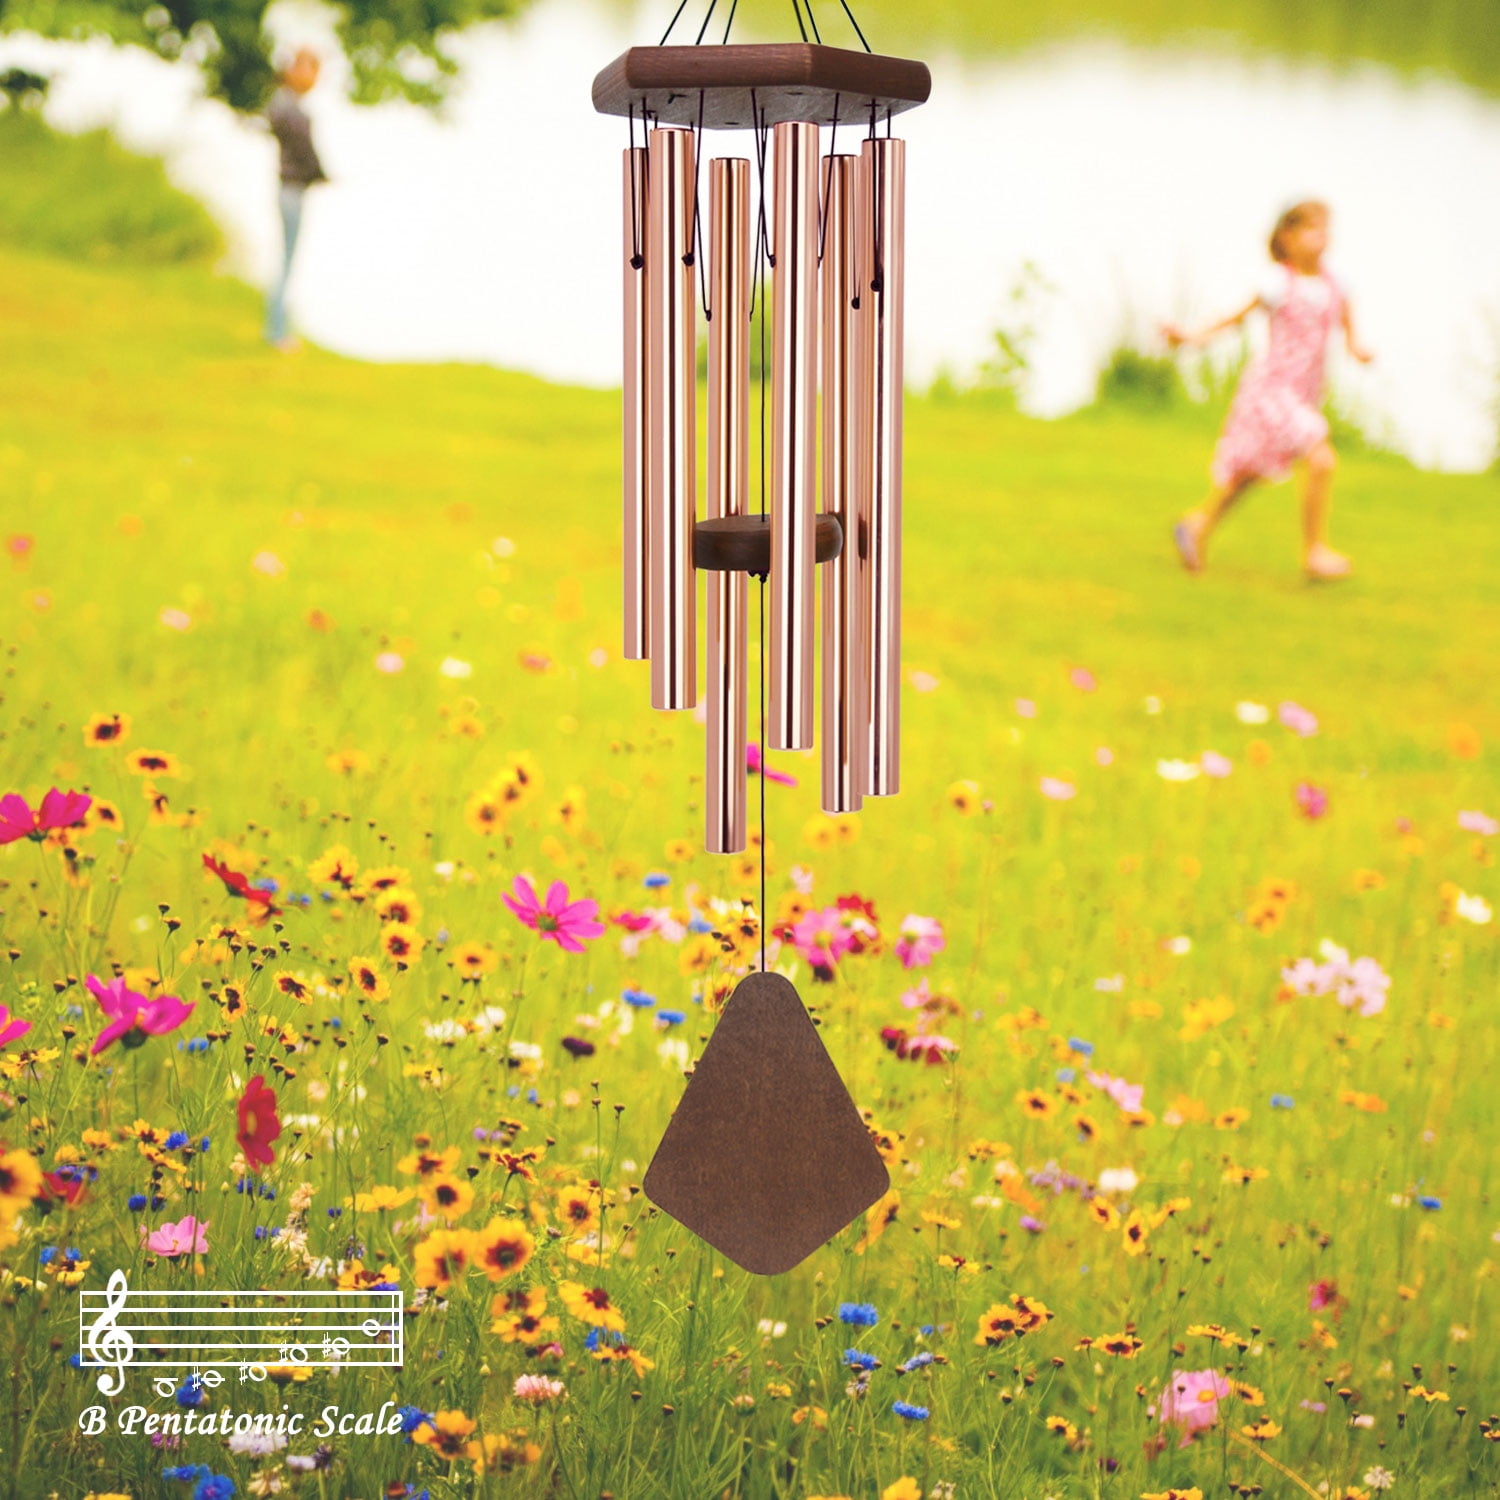 Wind Chime Outdoor Deep Tone Elegant Chime for Garden Patio Balcony and Home Green ASTARIN Memorial Wind Chimes for Outside Sympathy Wind-Chime Personalized with 6 Tuned Tubes 